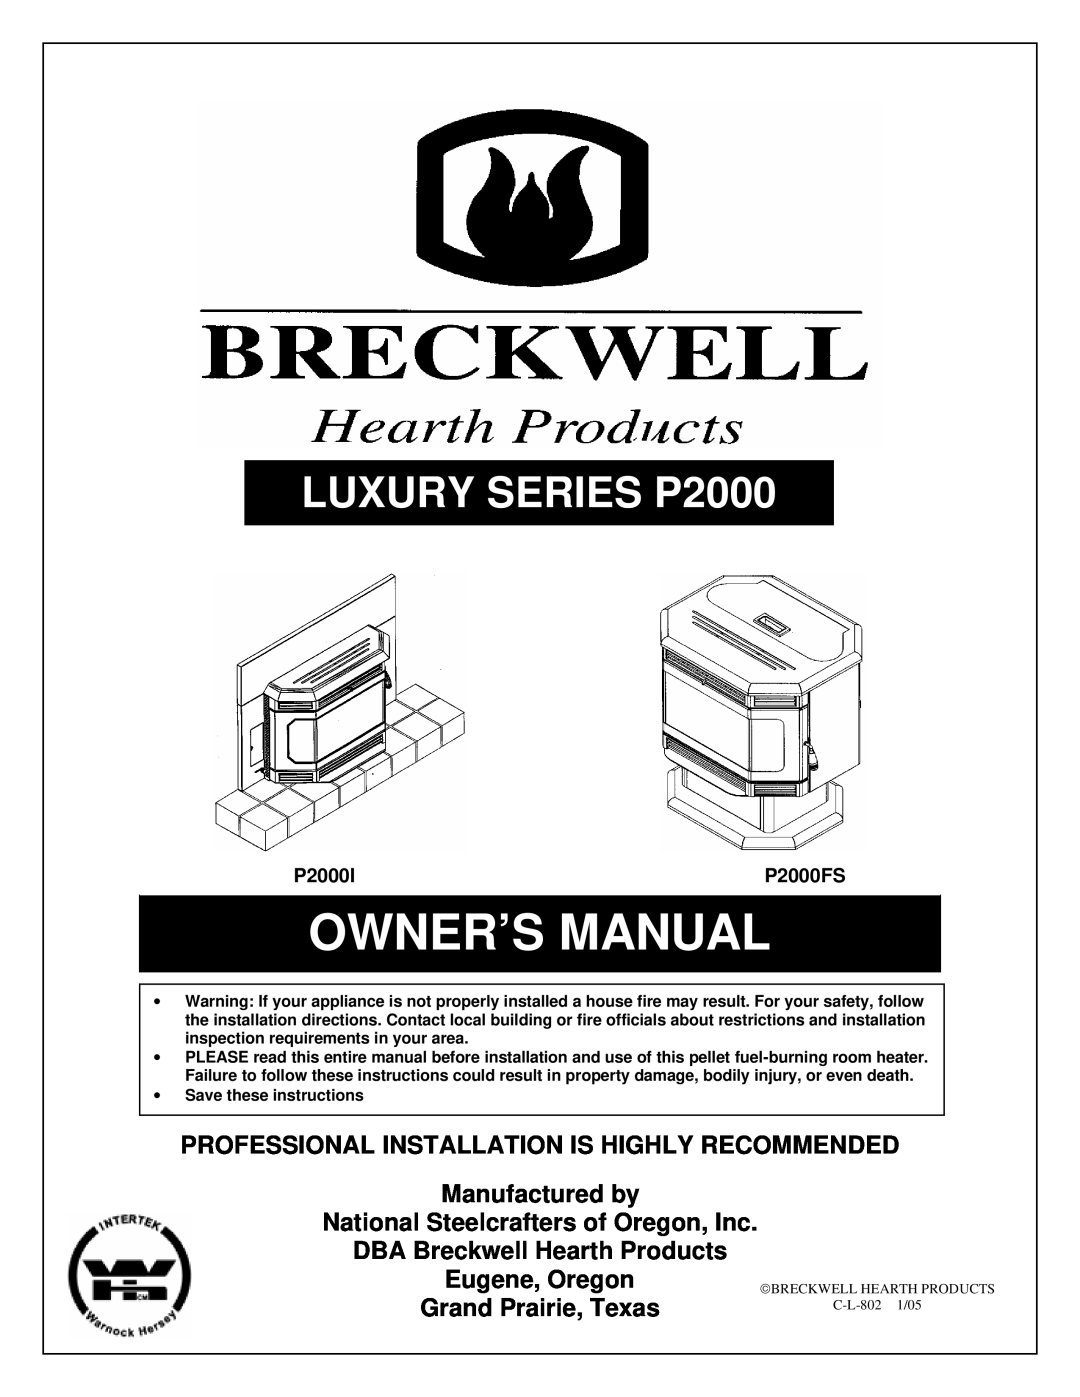 Breckwell P2000I owner manual Professional Installation Is Highly Recommended, Manufactured by, Grand Prairie, Texas 